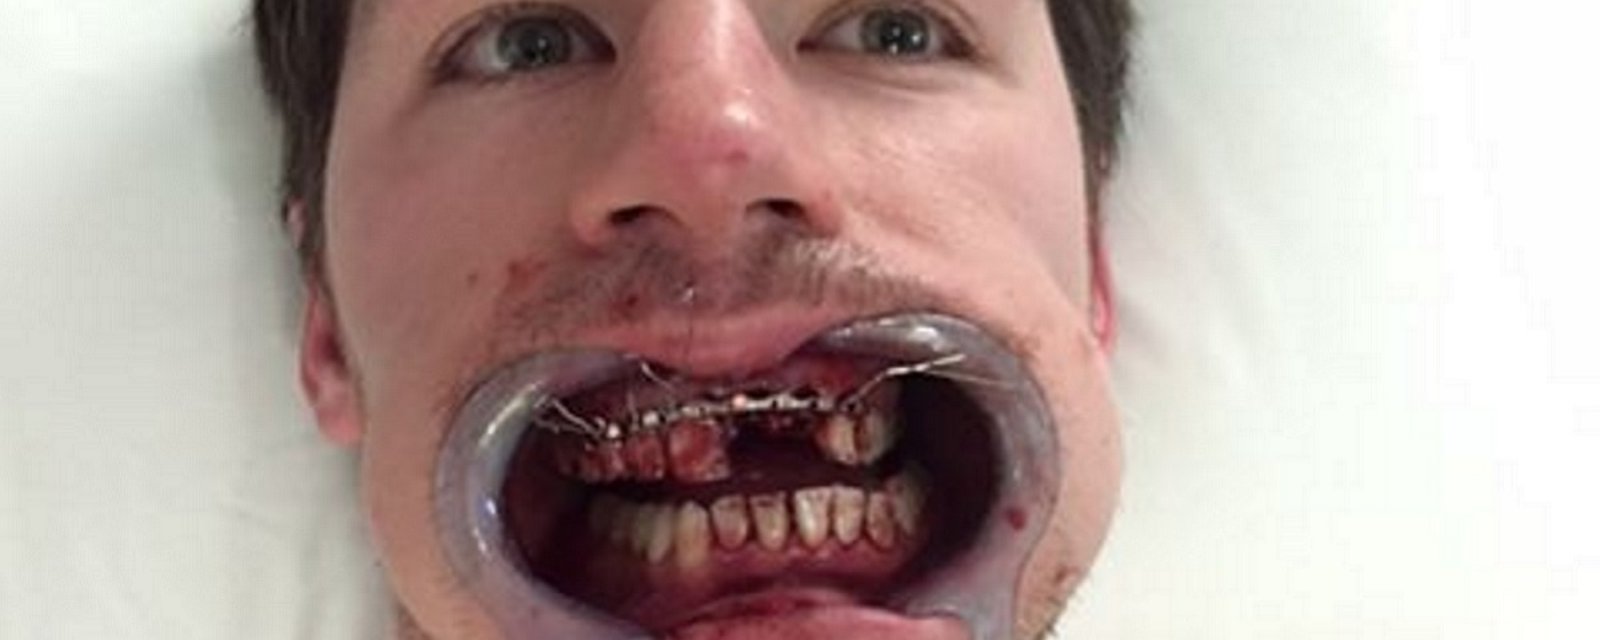 Breaking: Logan Couture shows gruesome pictures of his injury on Istagram.